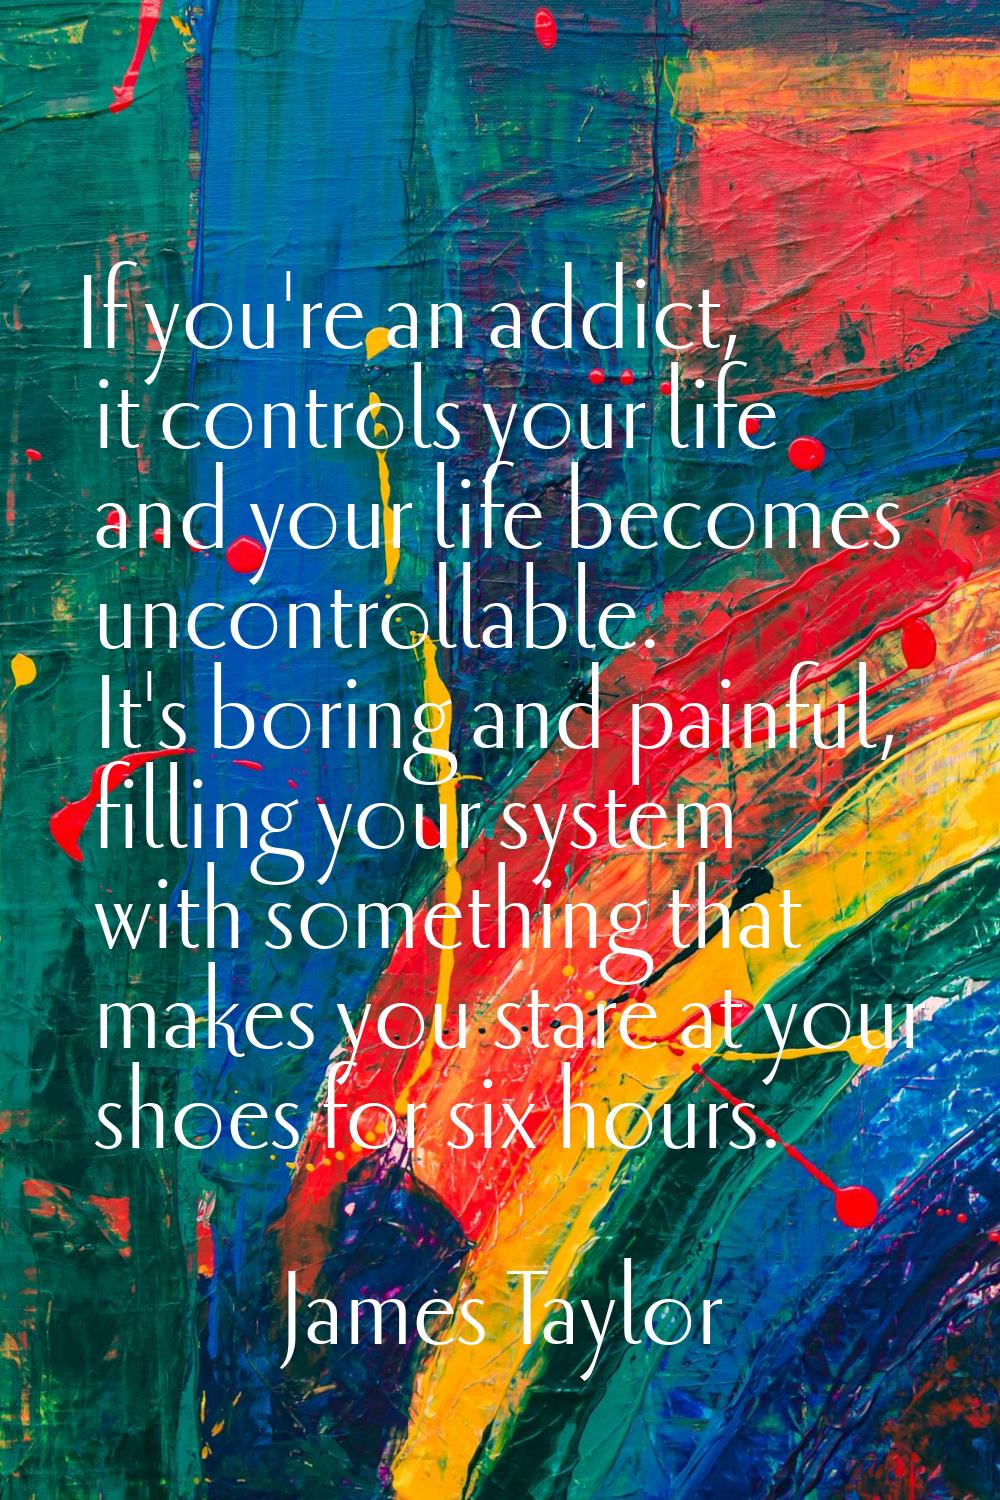 If you're an addict, it controls your life and your life becomes uncontrollable. It's boring and pa